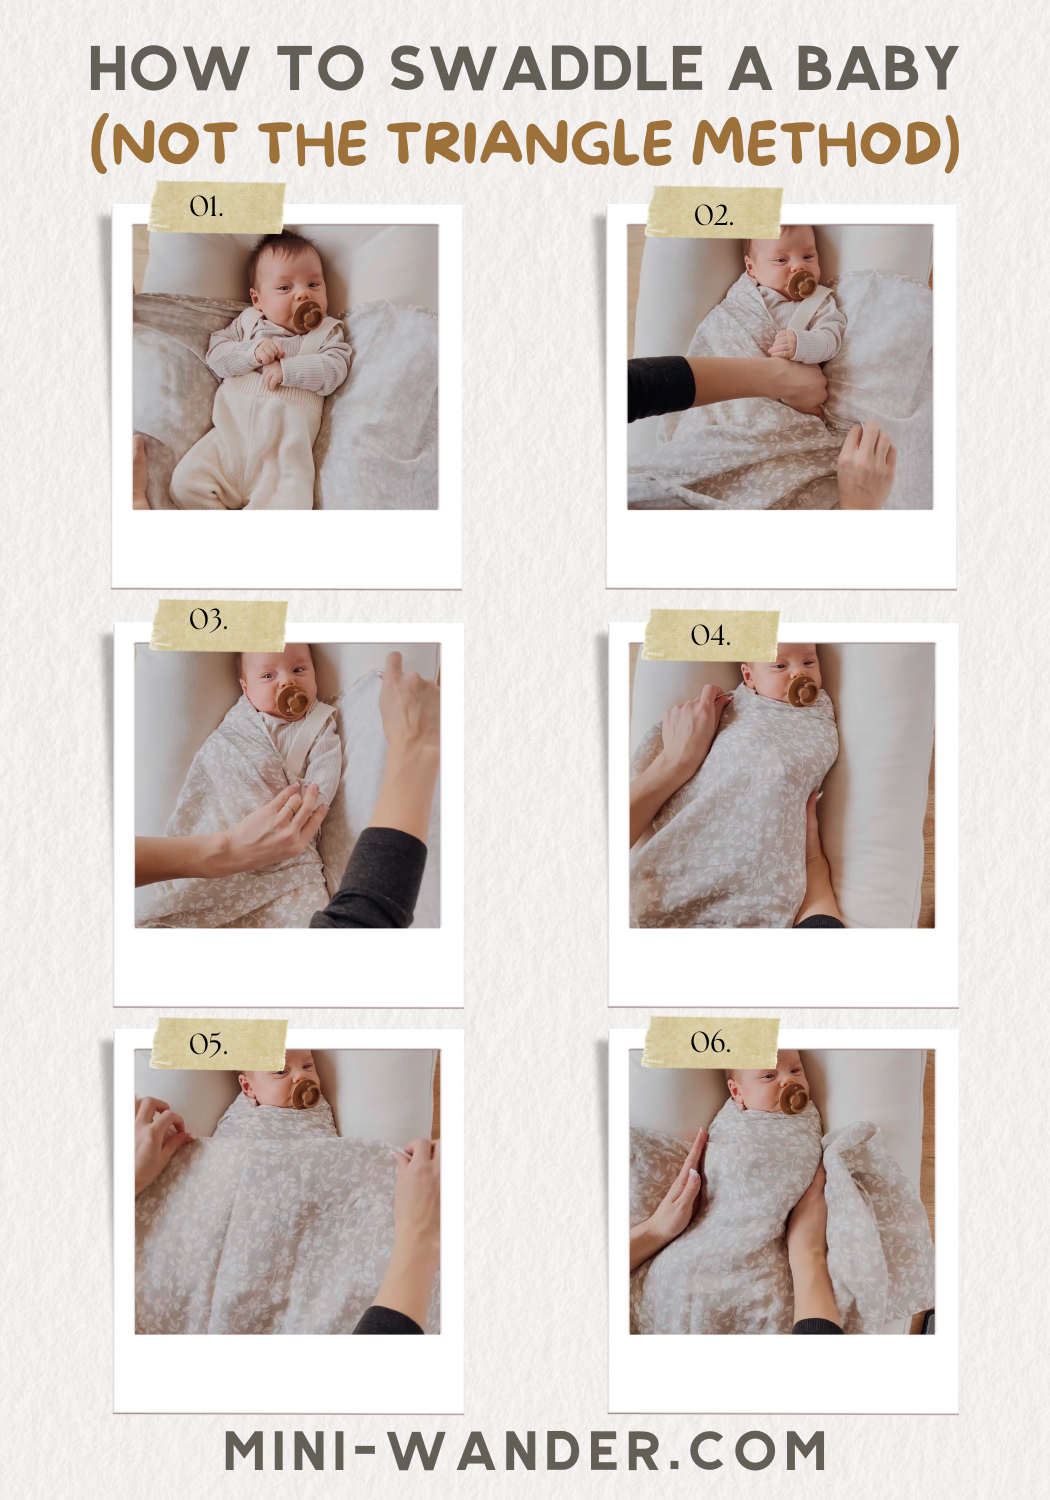 step by step images showing how to swaddle a baby